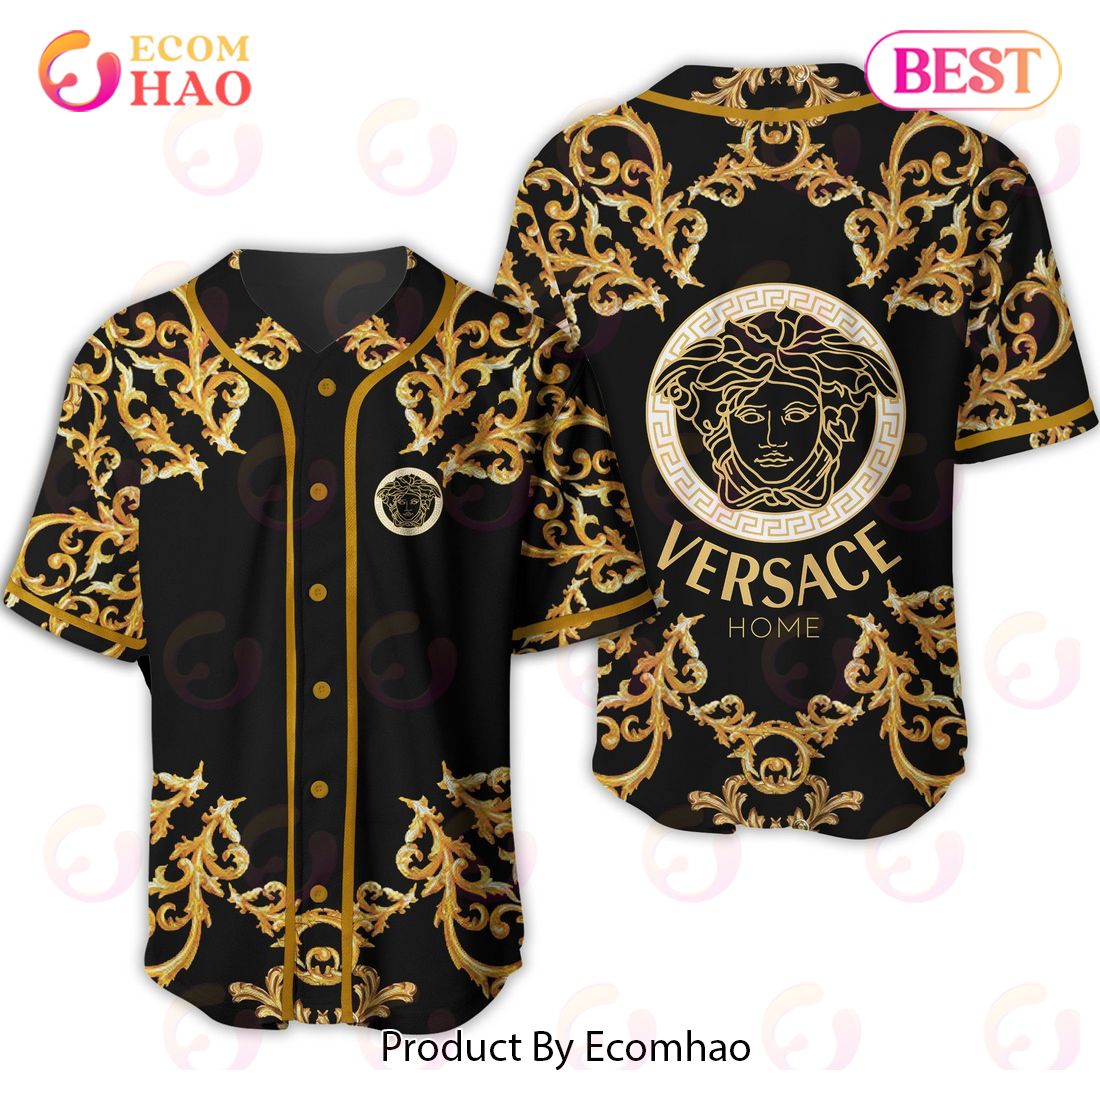 Versace Home Black Gold Luxury Brand Jersey Limited Edition